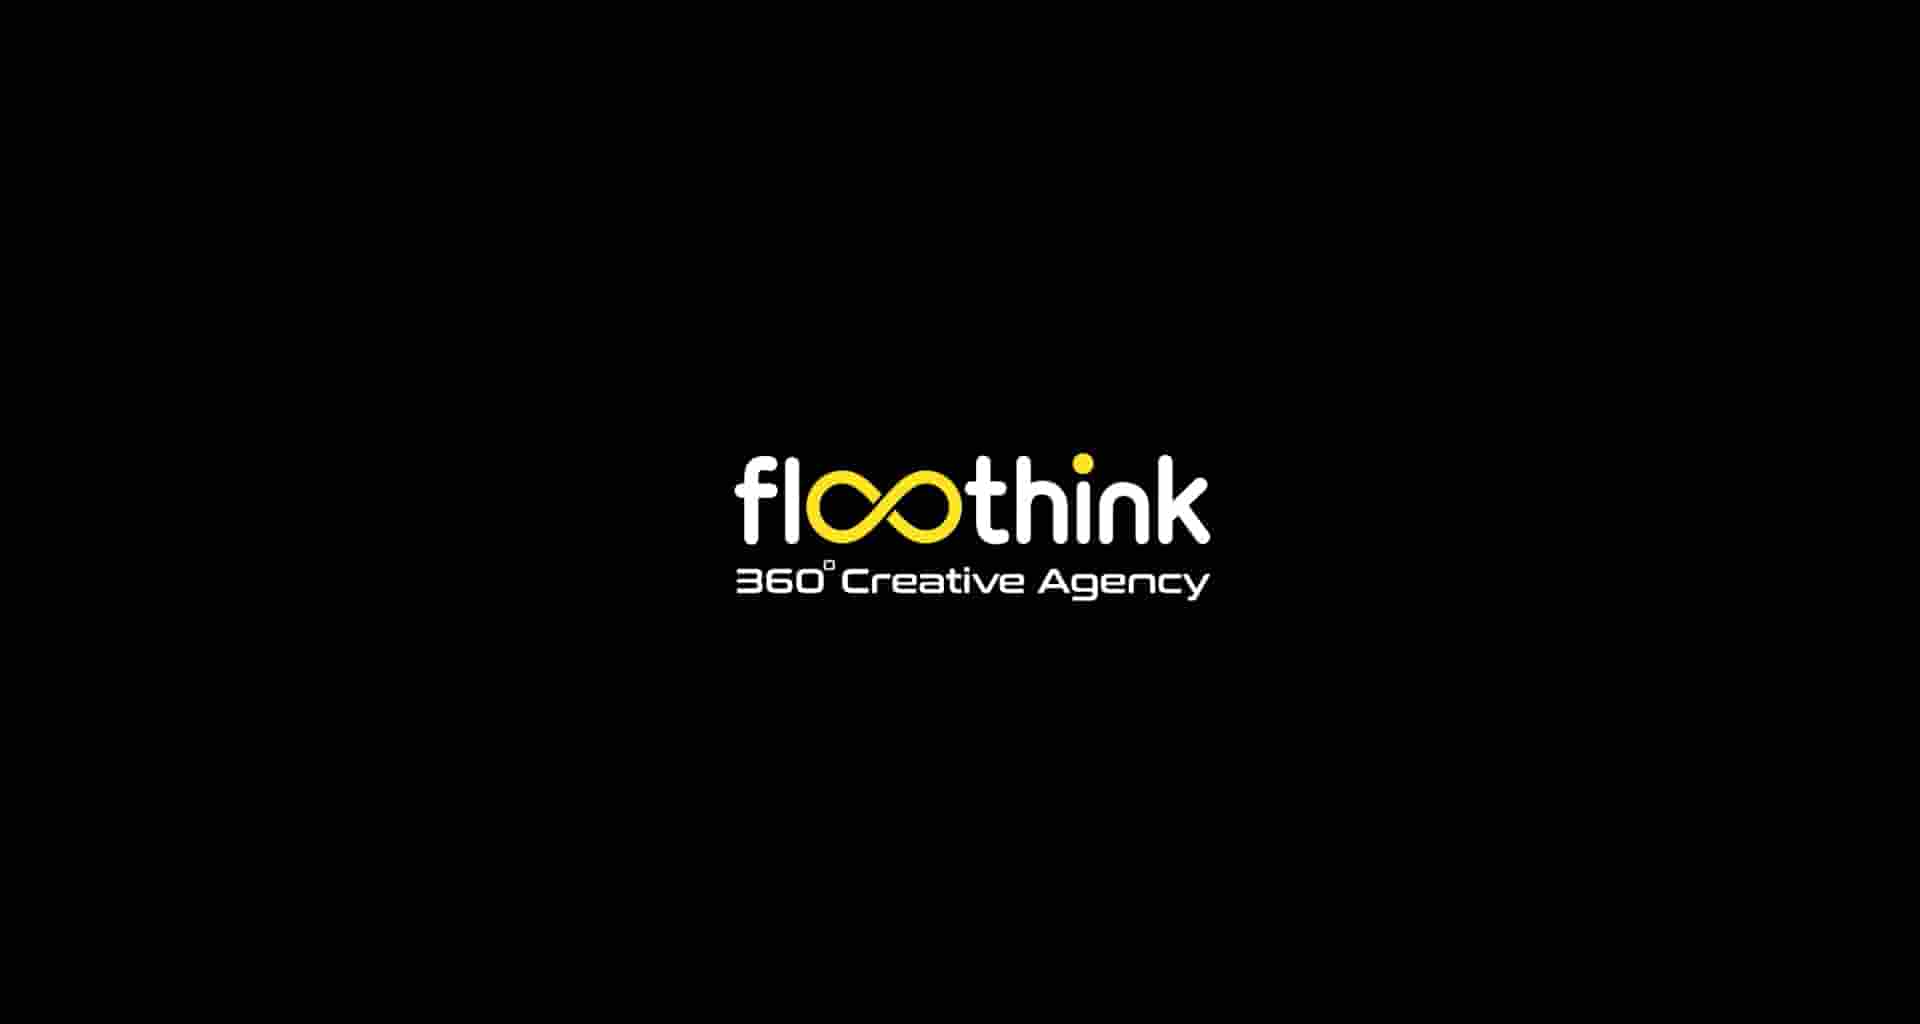 About Floothink Image 1